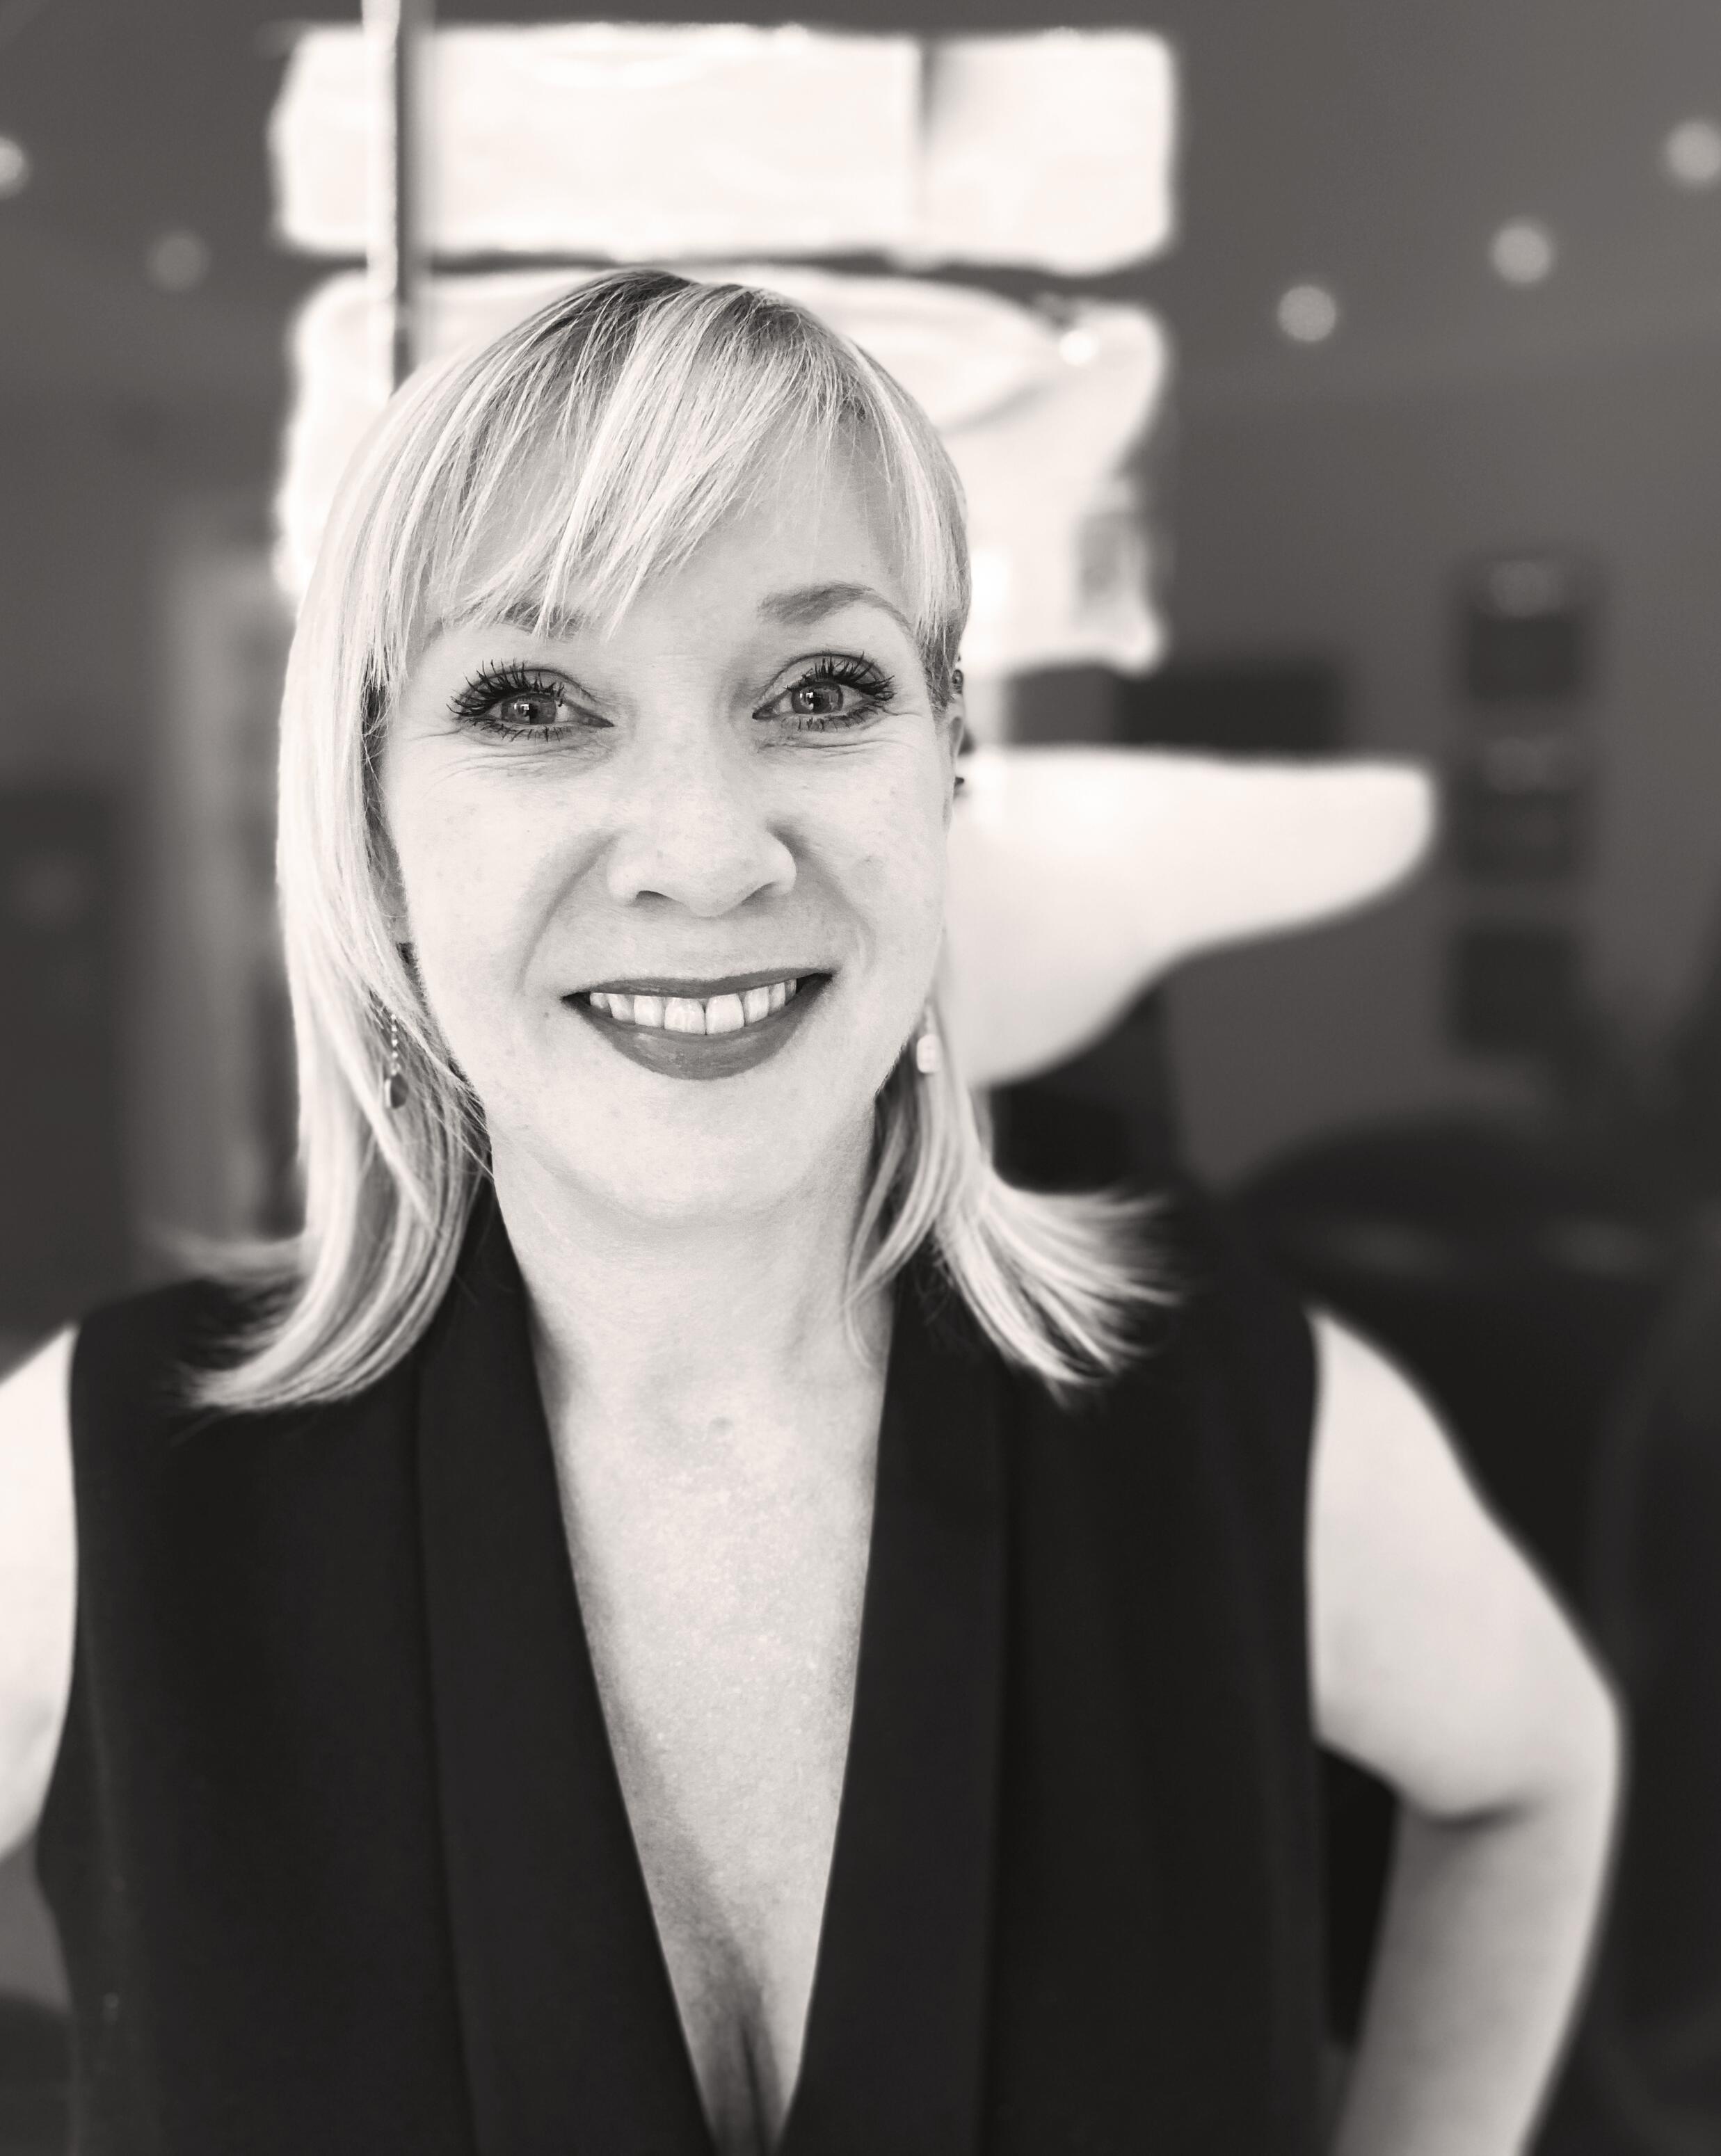 Stylist, colorist and care expertB&eacute;atrice has been with the Institute for many years, passing on her expertise, passion and positive energy to her clients, who are therefore very loyal to her.

